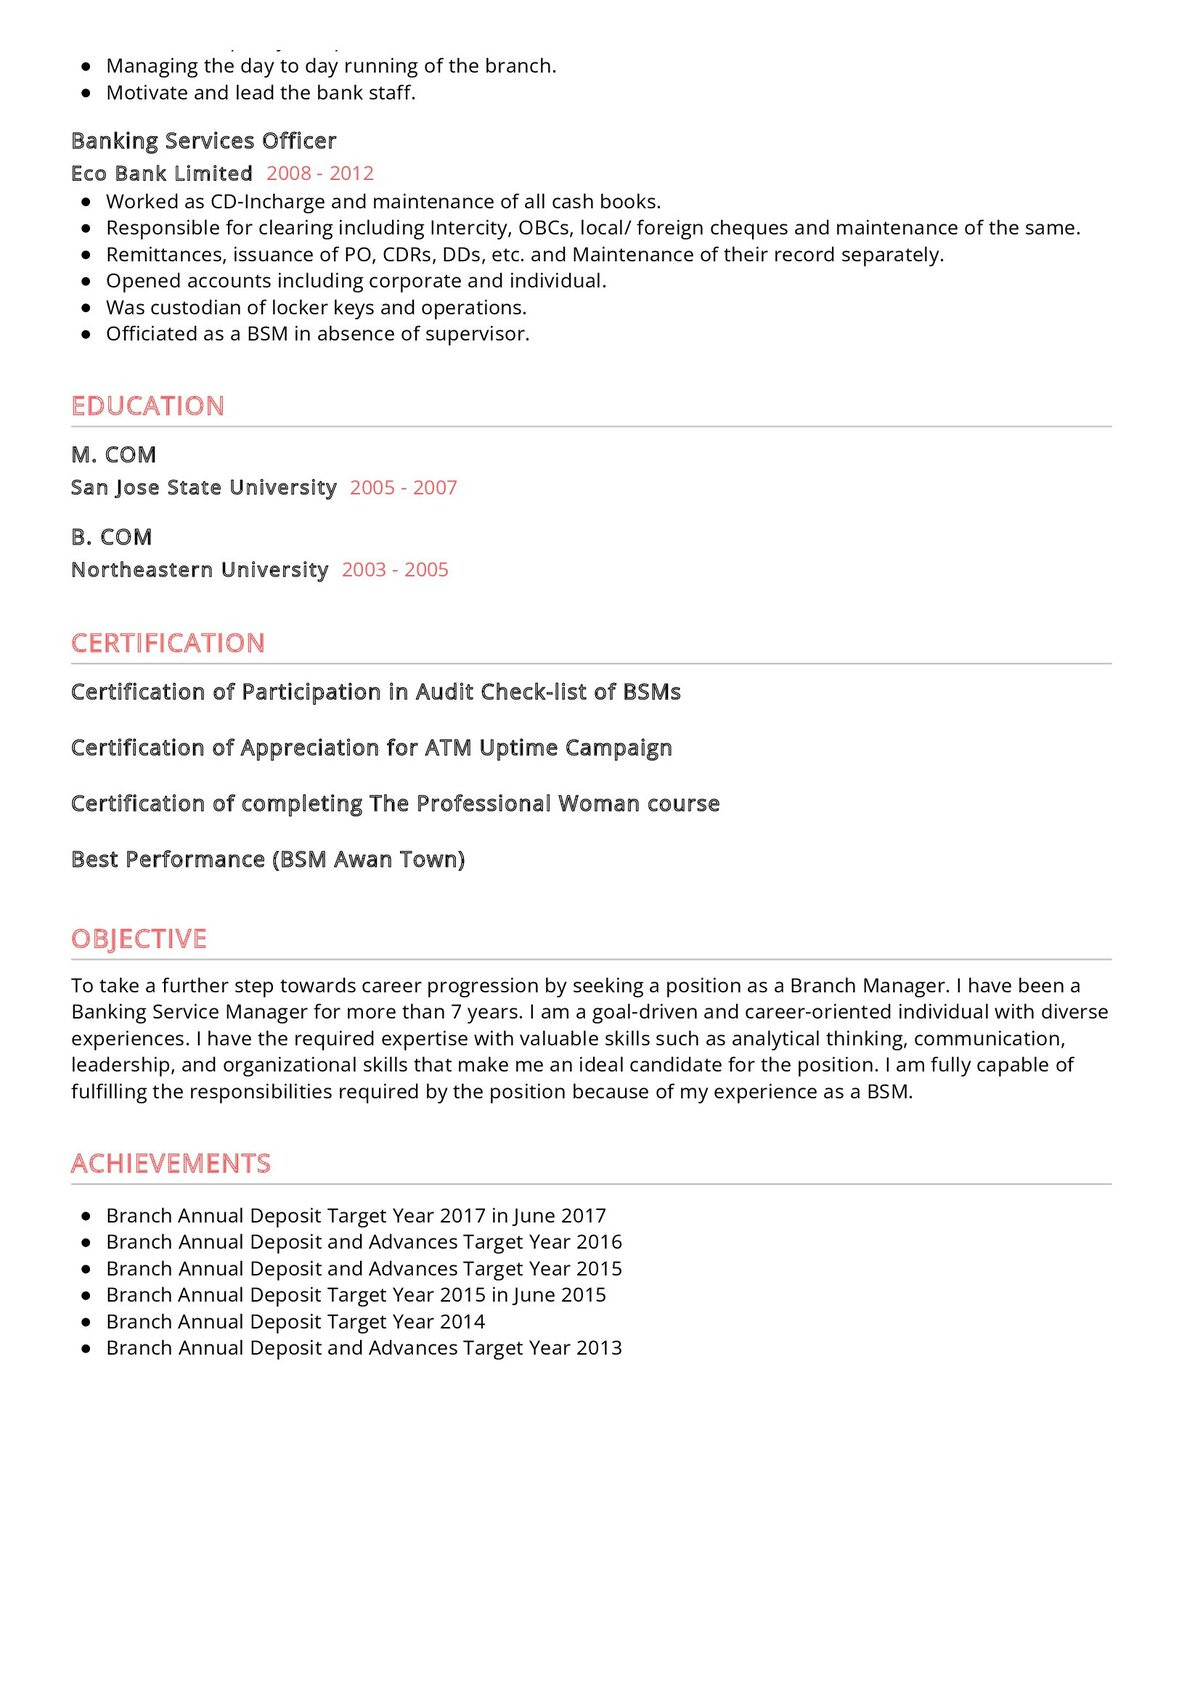 Sample Resume for Bank Service Manager Banking Services Officer Resume Sample 2022 Writing Tips …